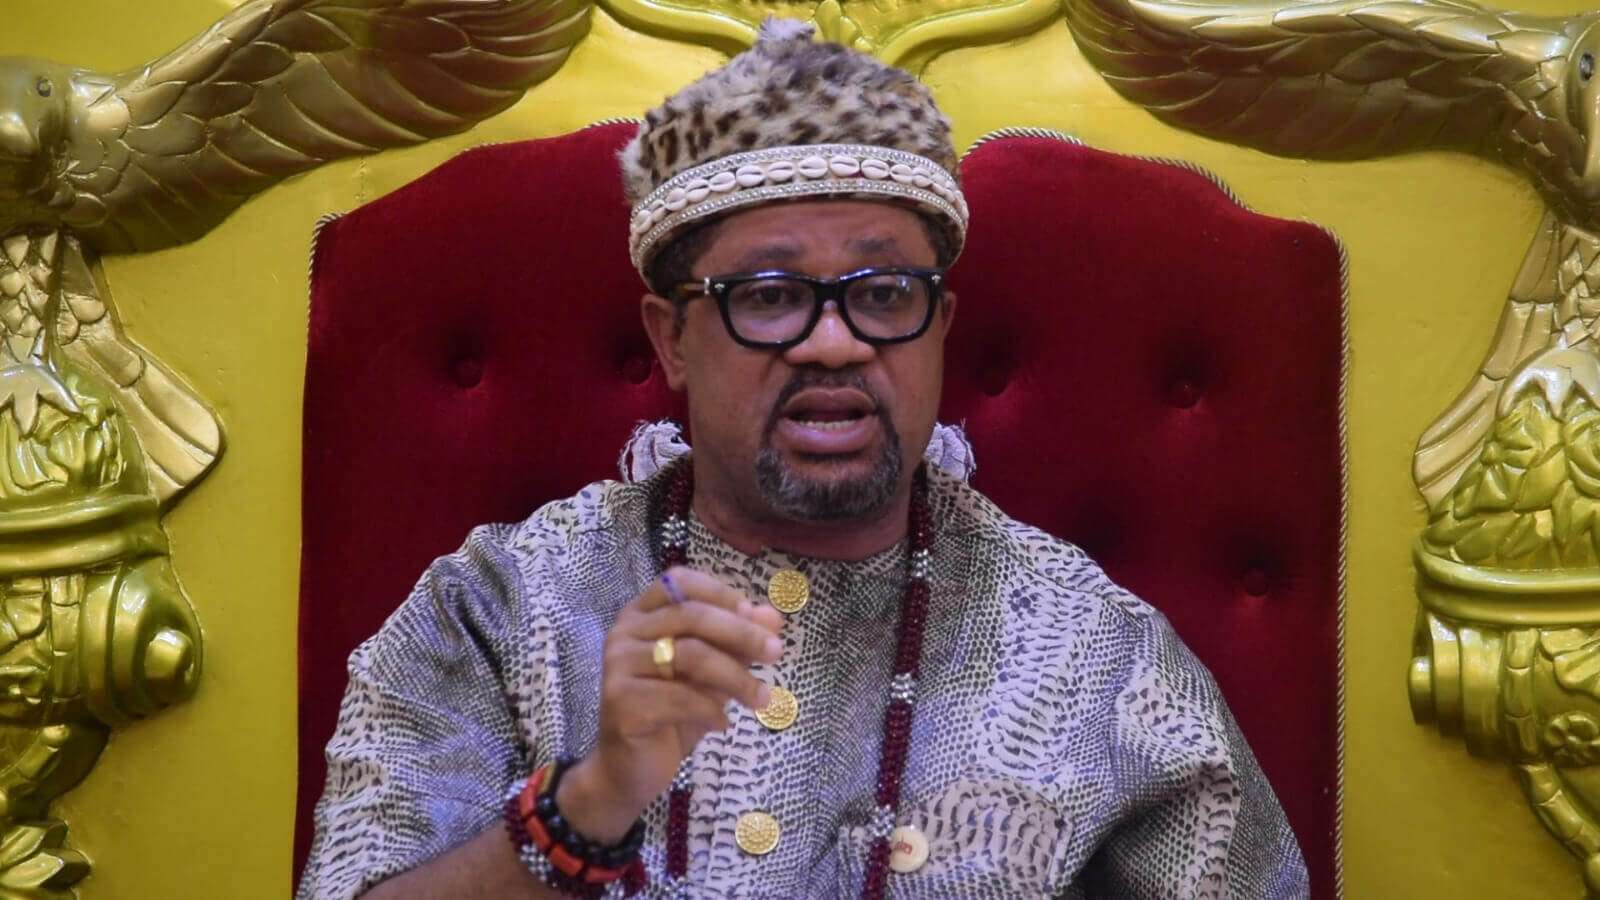 Igbo King cautions Youth on Drug Abuse and Trafficking